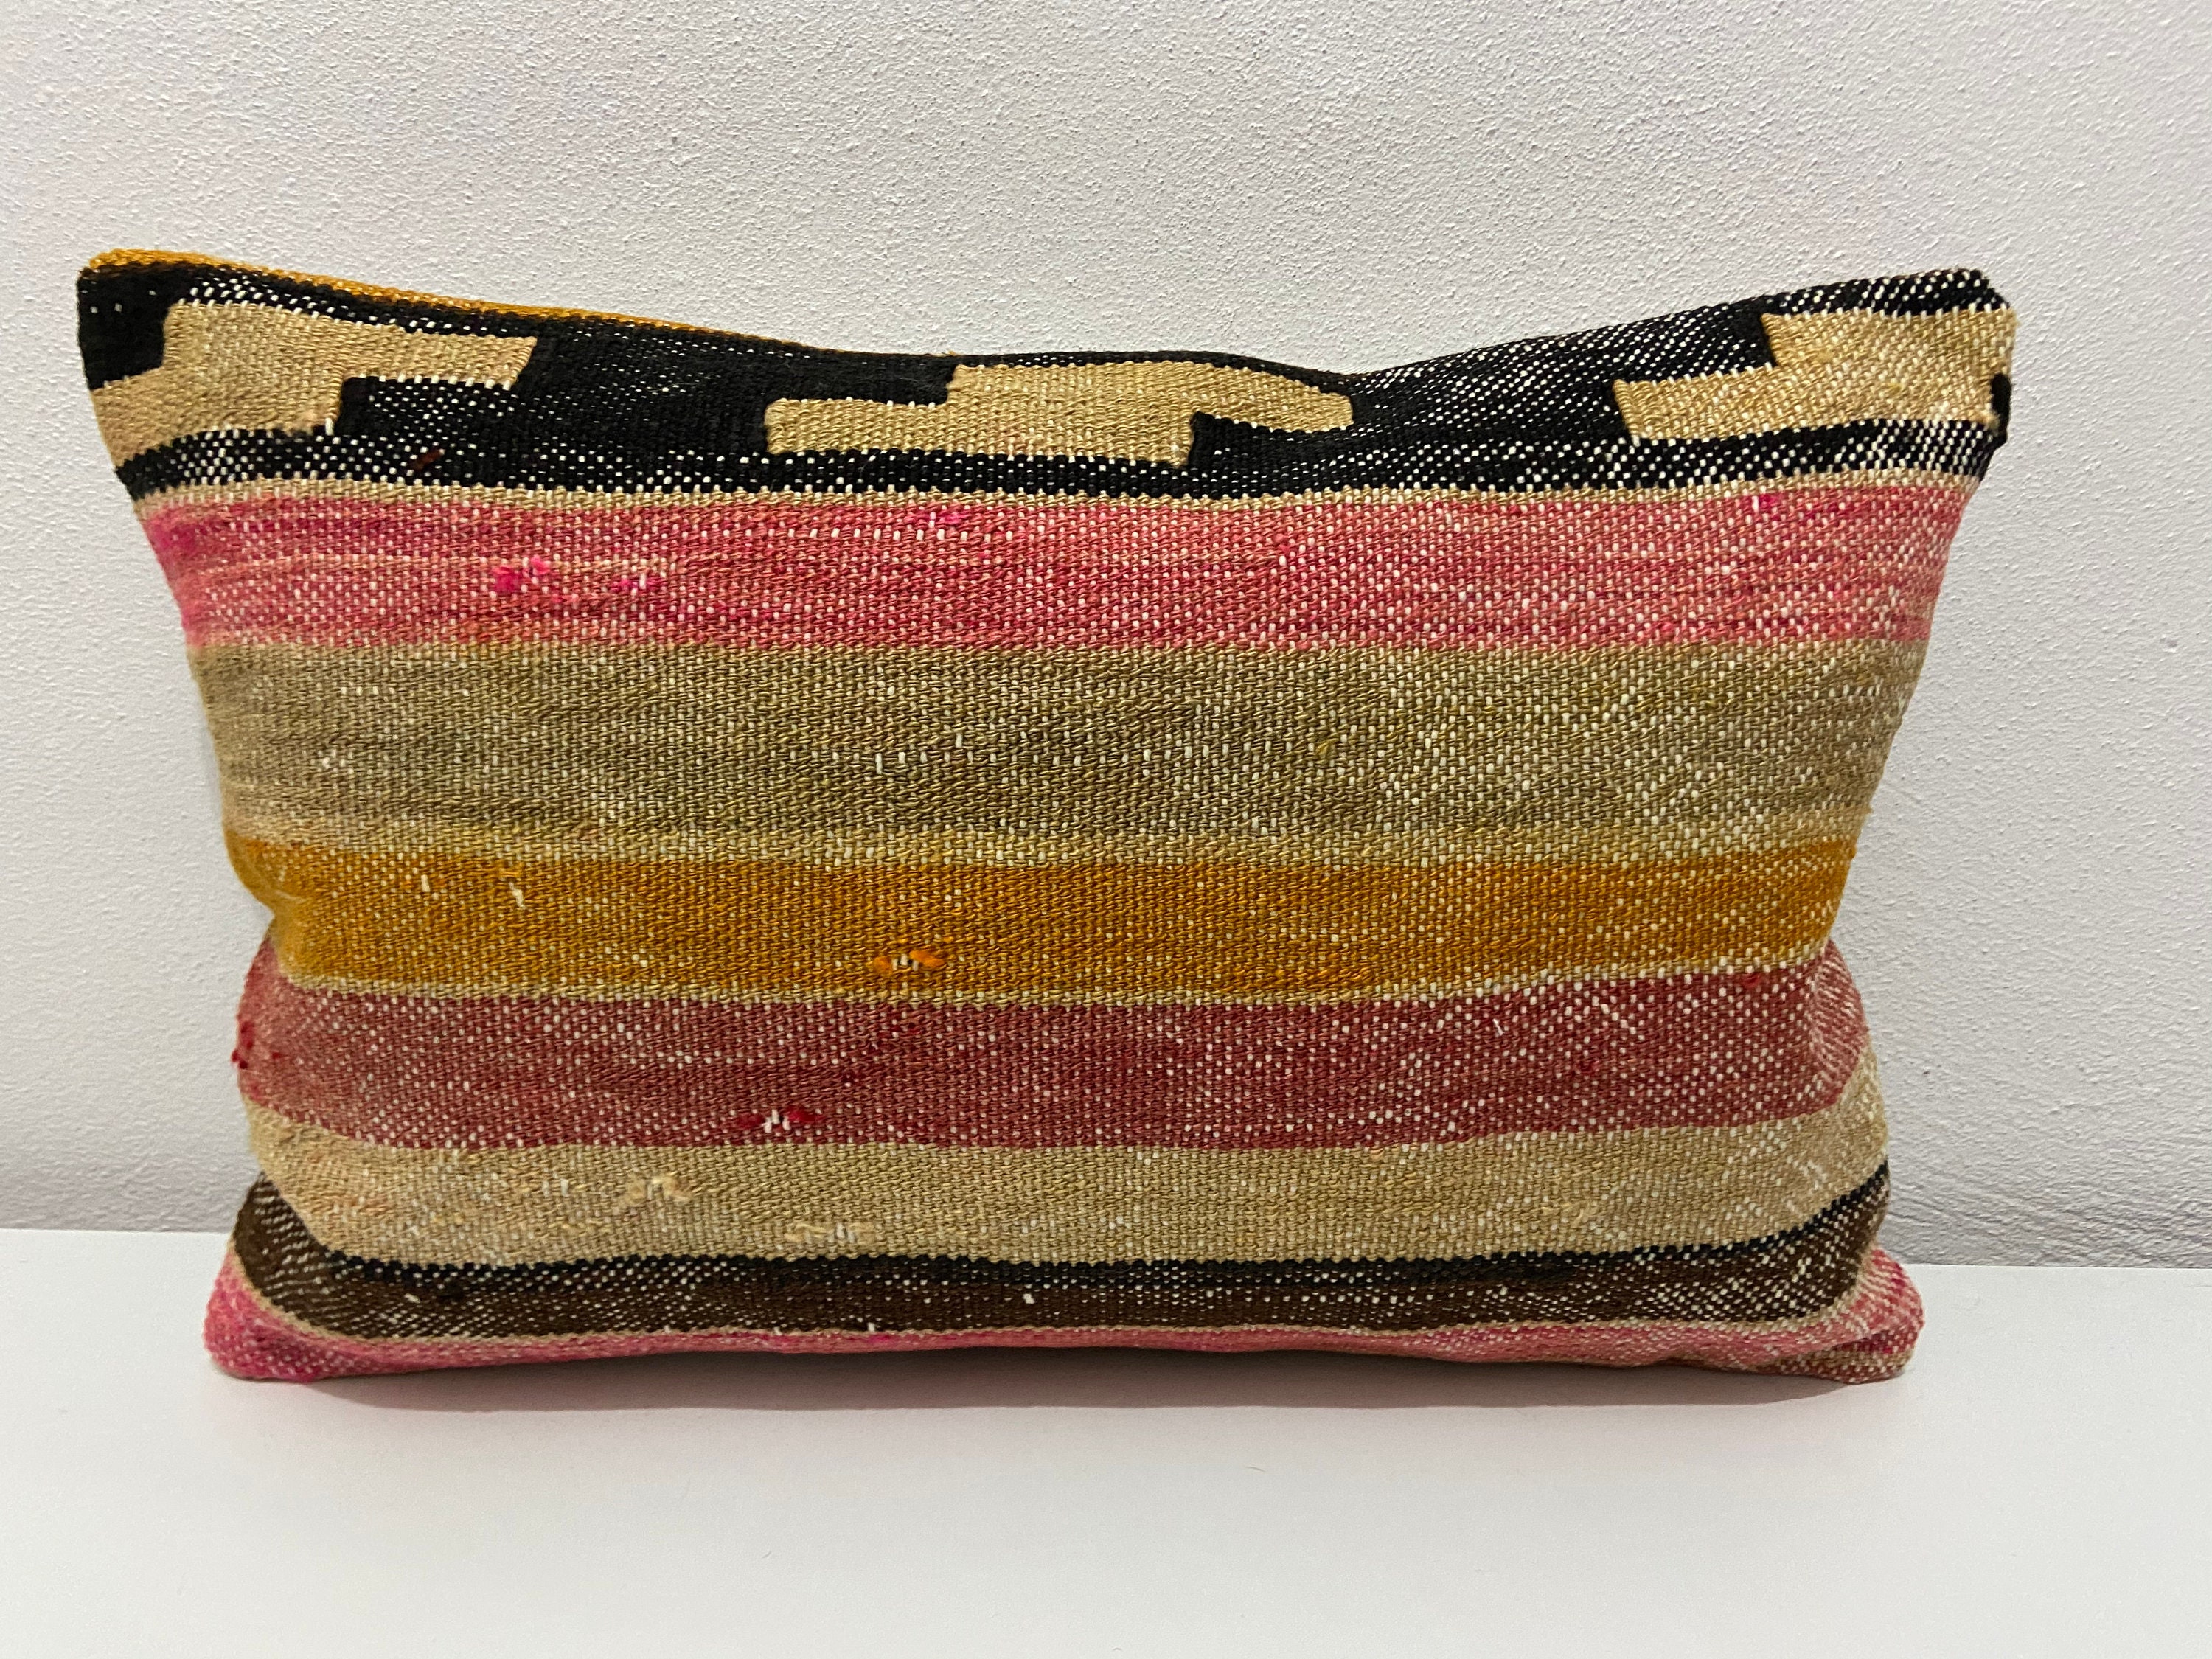 hanmade pillow Simple striped kilim pillow cover Handwoven Kilim pillow,16x24 inches,40x60cm,Turkish kilim Pillow cover cushion cover